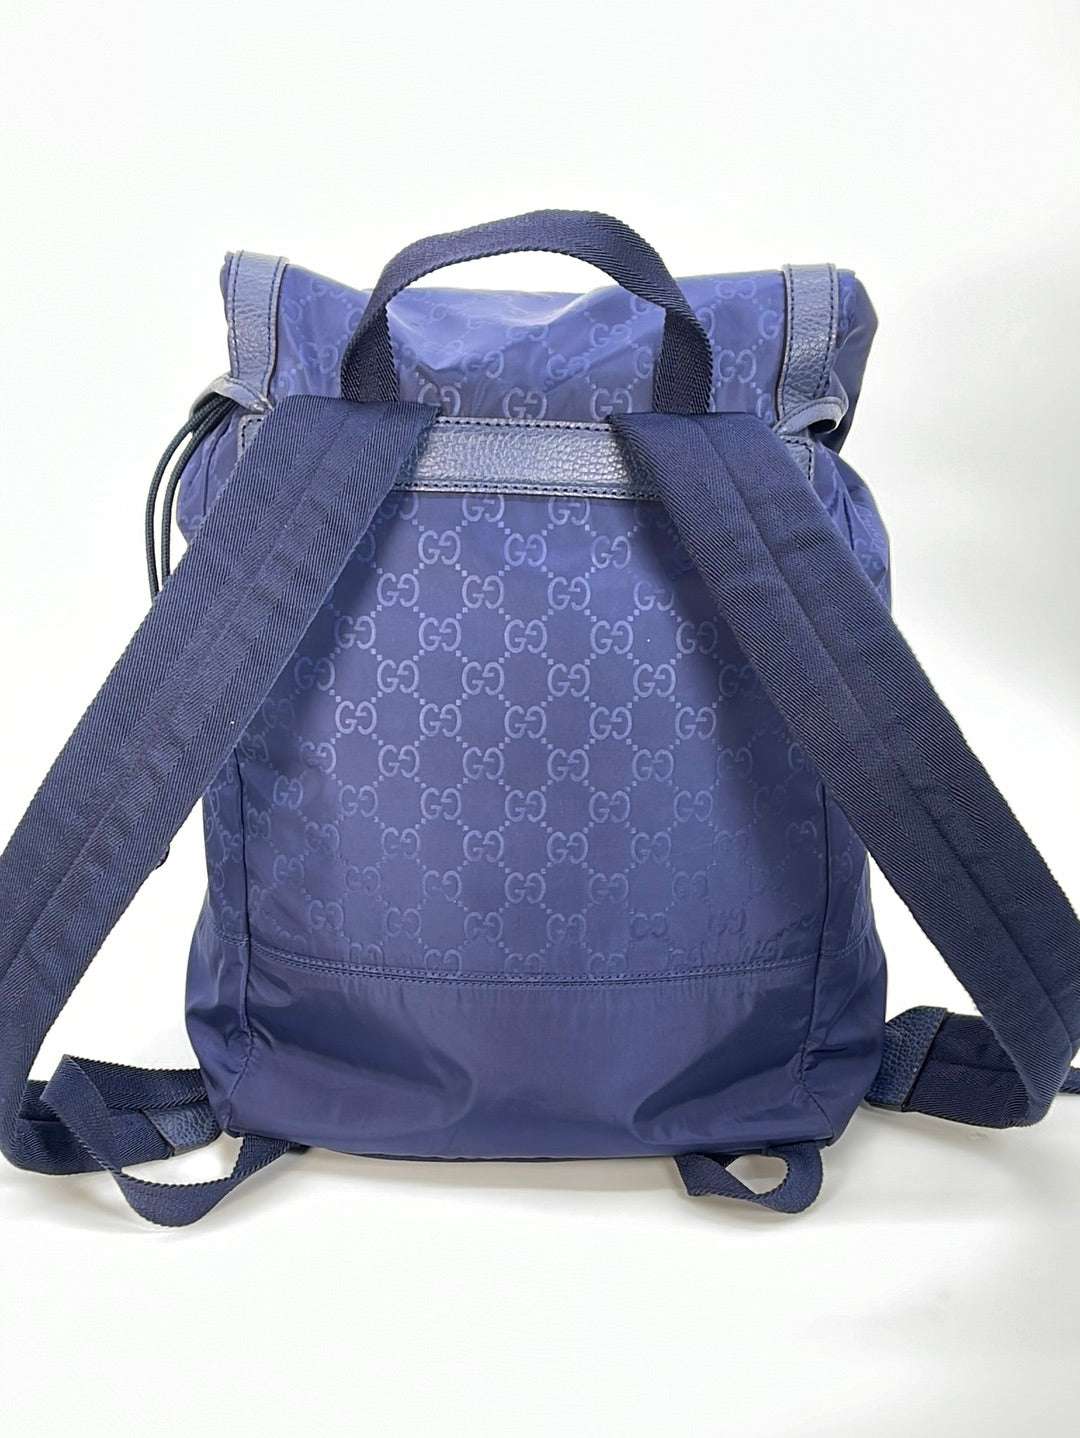 Preloved GUCCI Blue Nylon GG Canvas Large Light Double Buckle Backpack 510336498879 030223